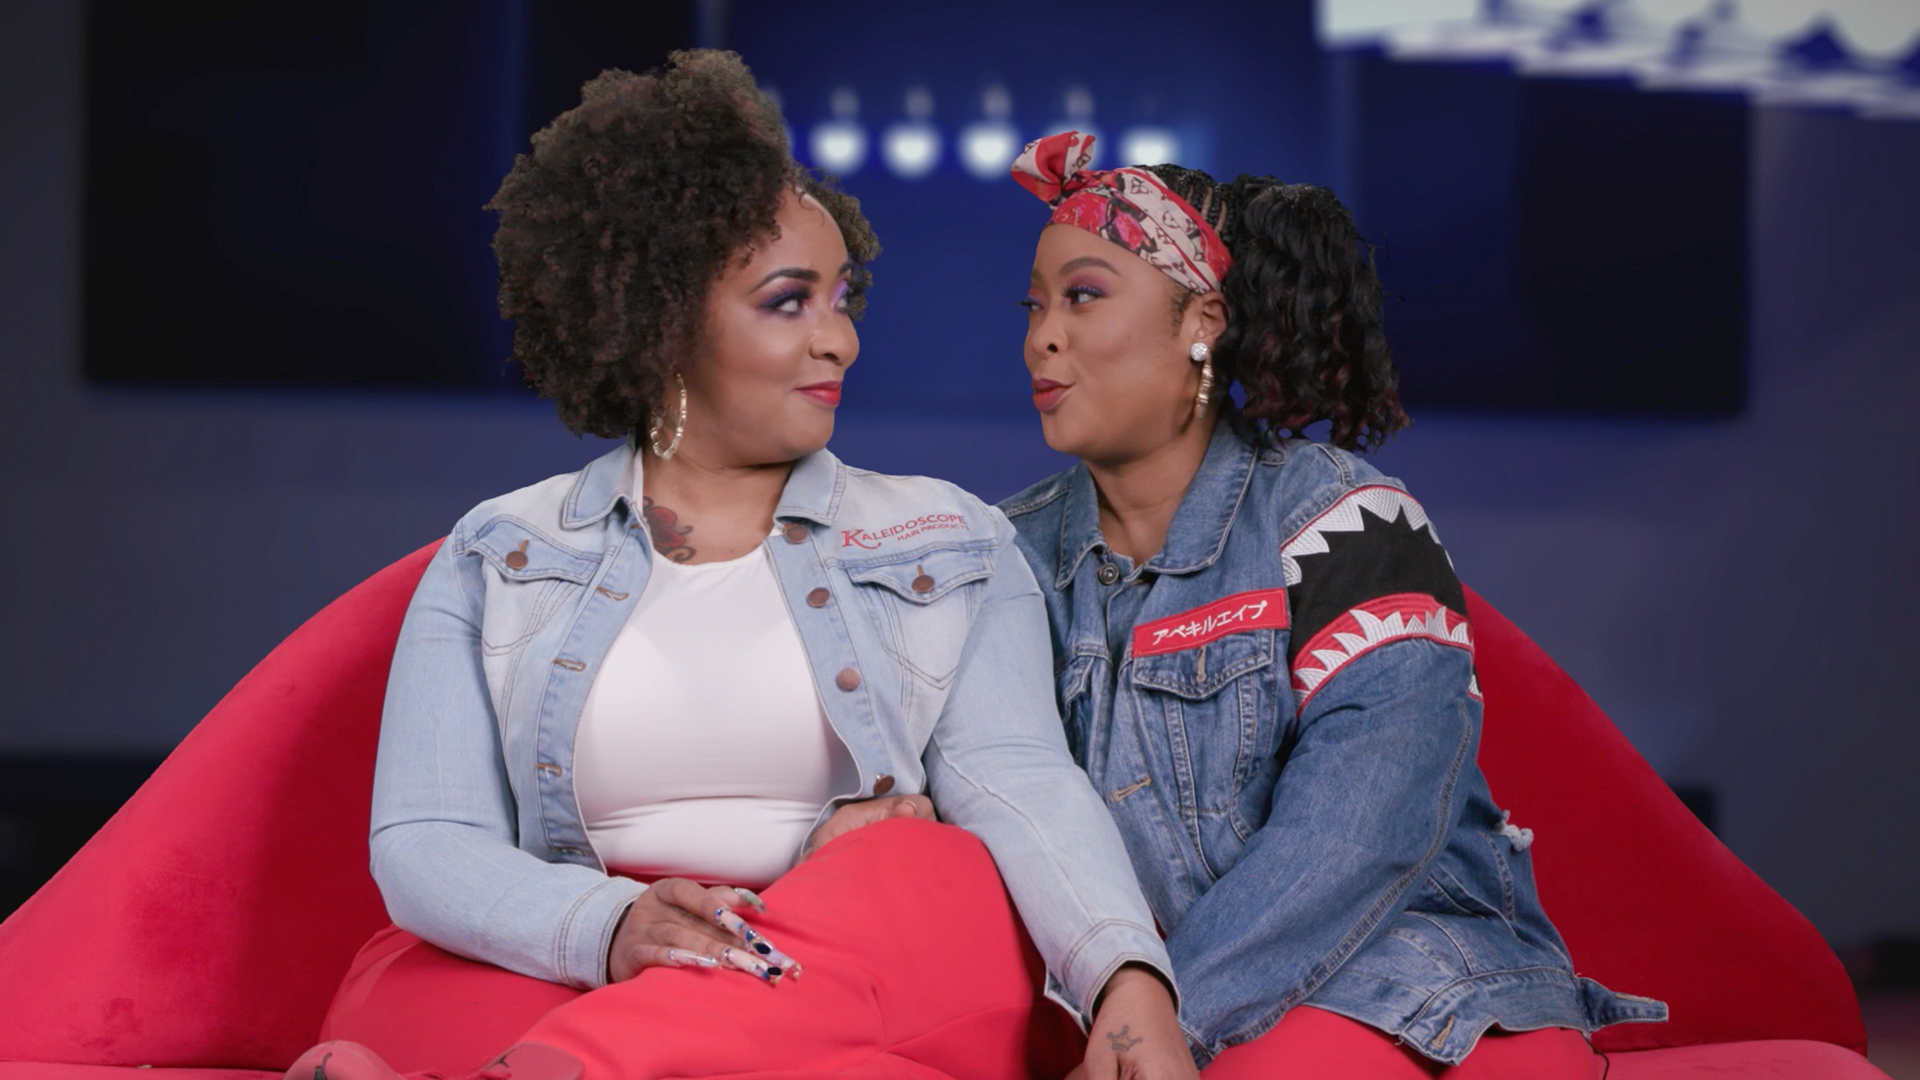 Watch Brat & Judy Are So So in Love! | Growing Up Hip Hop Video Extras